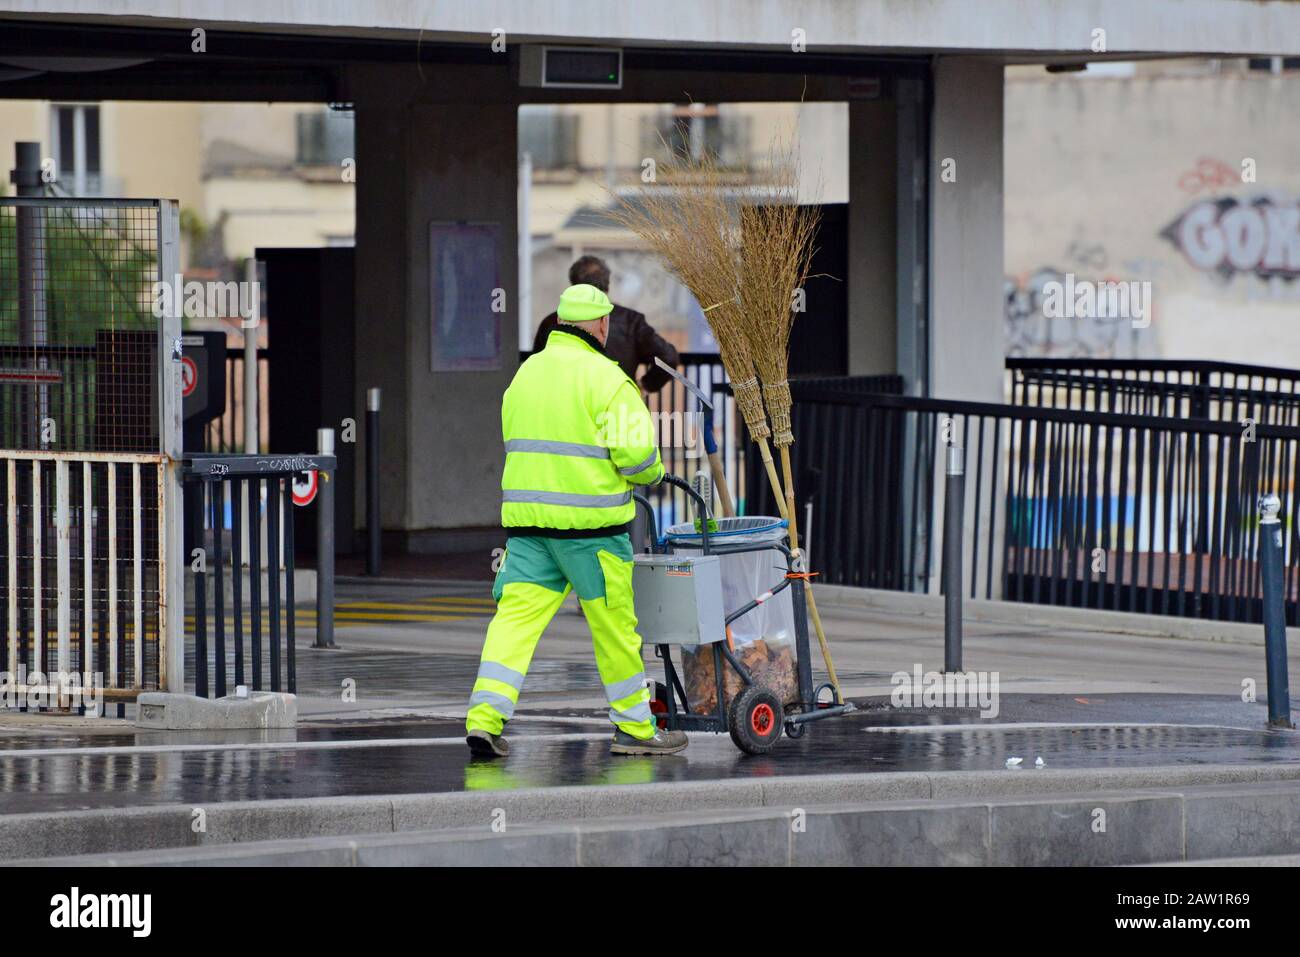 A road cleaner using traditional birch besom brooms for street sweeping in Montpellier, France Stock Photo